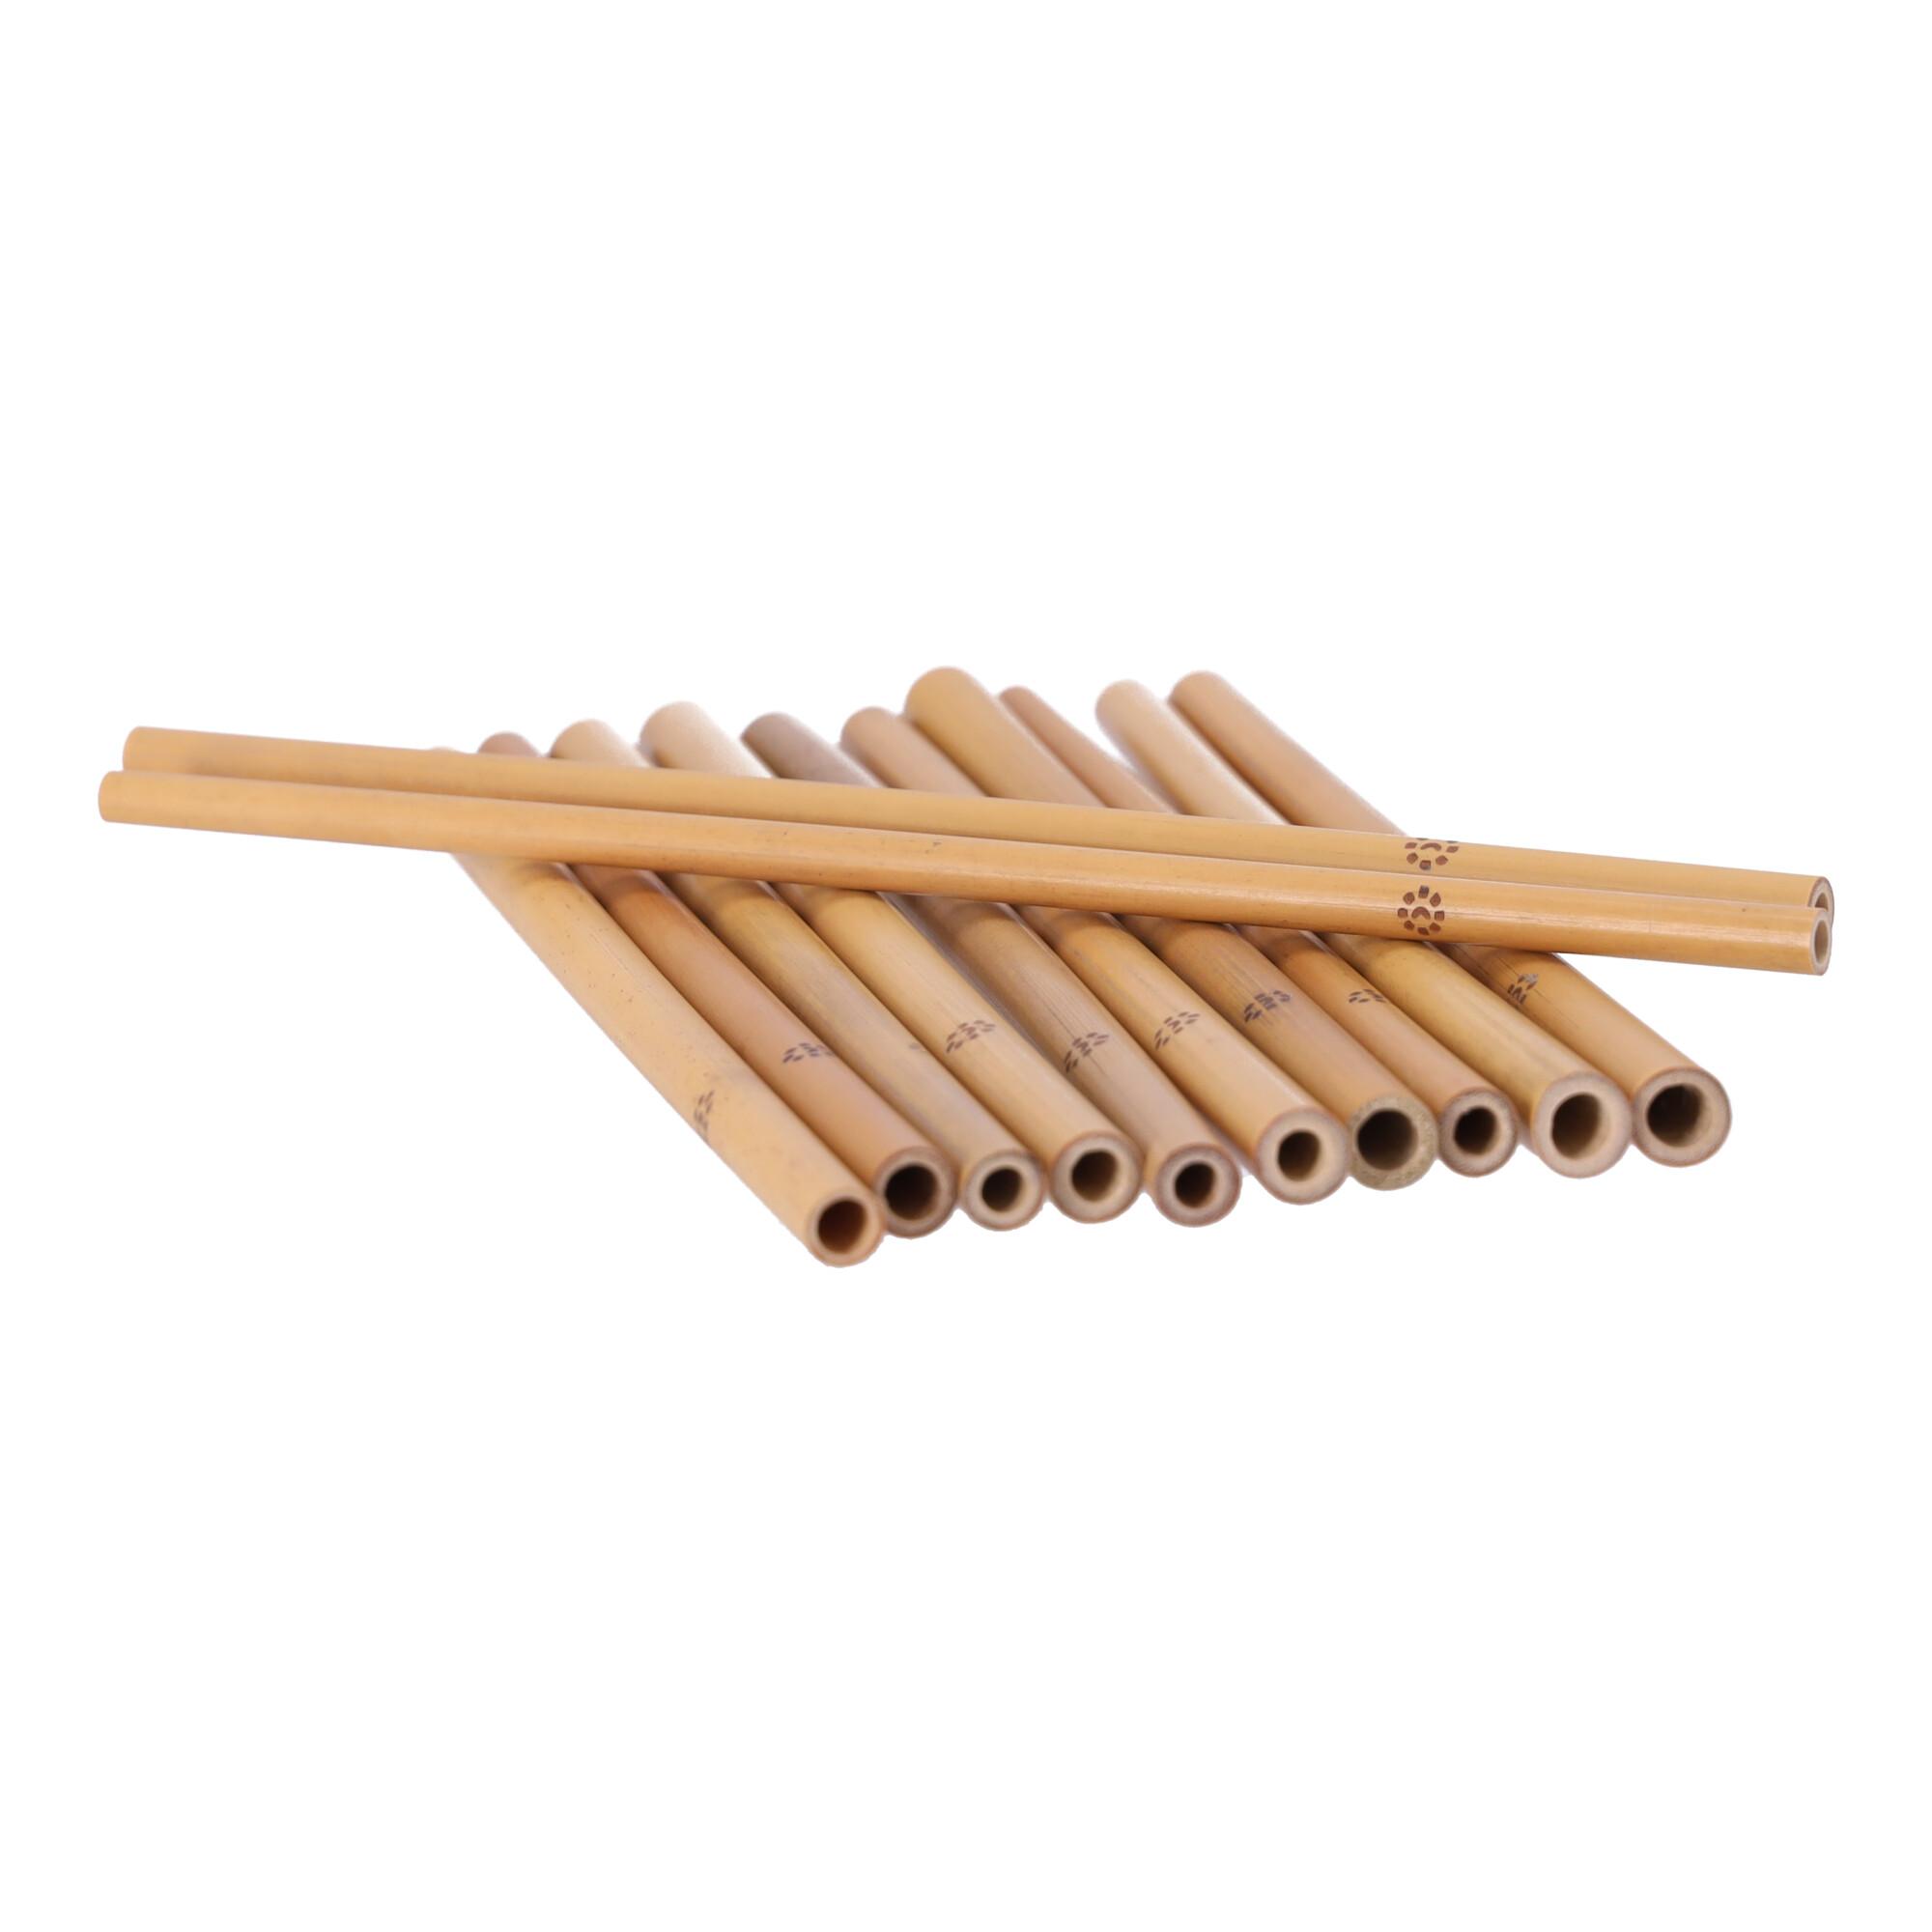 Reusable bamboo straws 200x6-9 mm 12 pcs. + cleaner